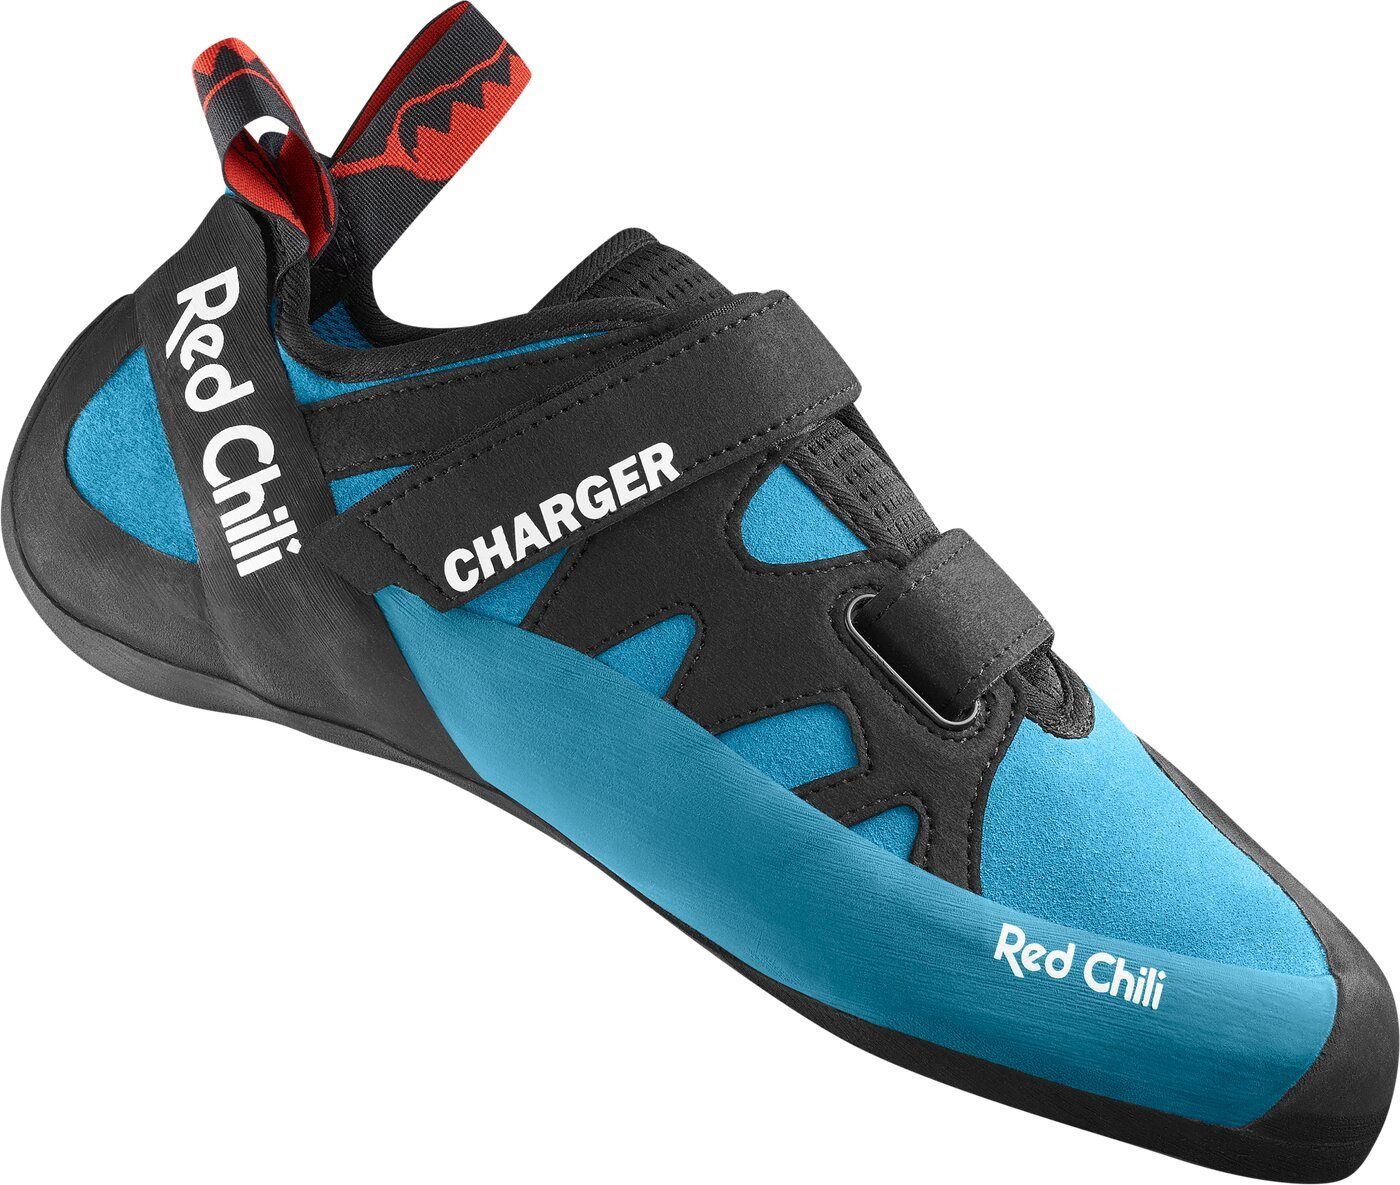 Red Chili Charger INKBLUE Kletterschuh